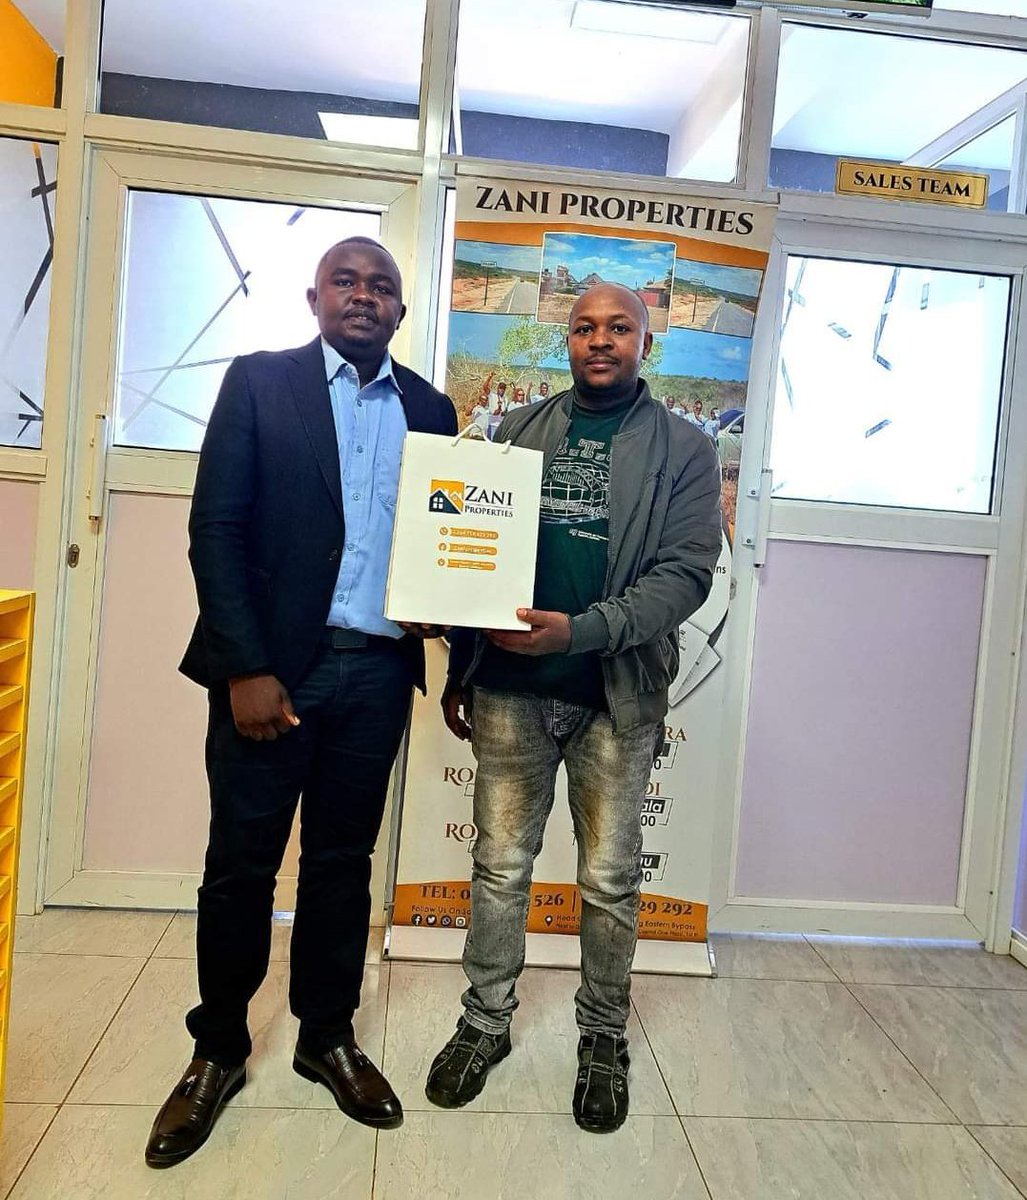 Happiness is receiving your title deed.

Happy client...

You can also be a land owner💯.. we have affordable plots hata kwa mkulima mdogo.
Call : 0716 92 92 92 .
#ZaniProperties #happyclient #titledeed
Sam Gituku Freshly Mwamburi Jimmy Kibaki Citam Valley Road Twende Limuru 3